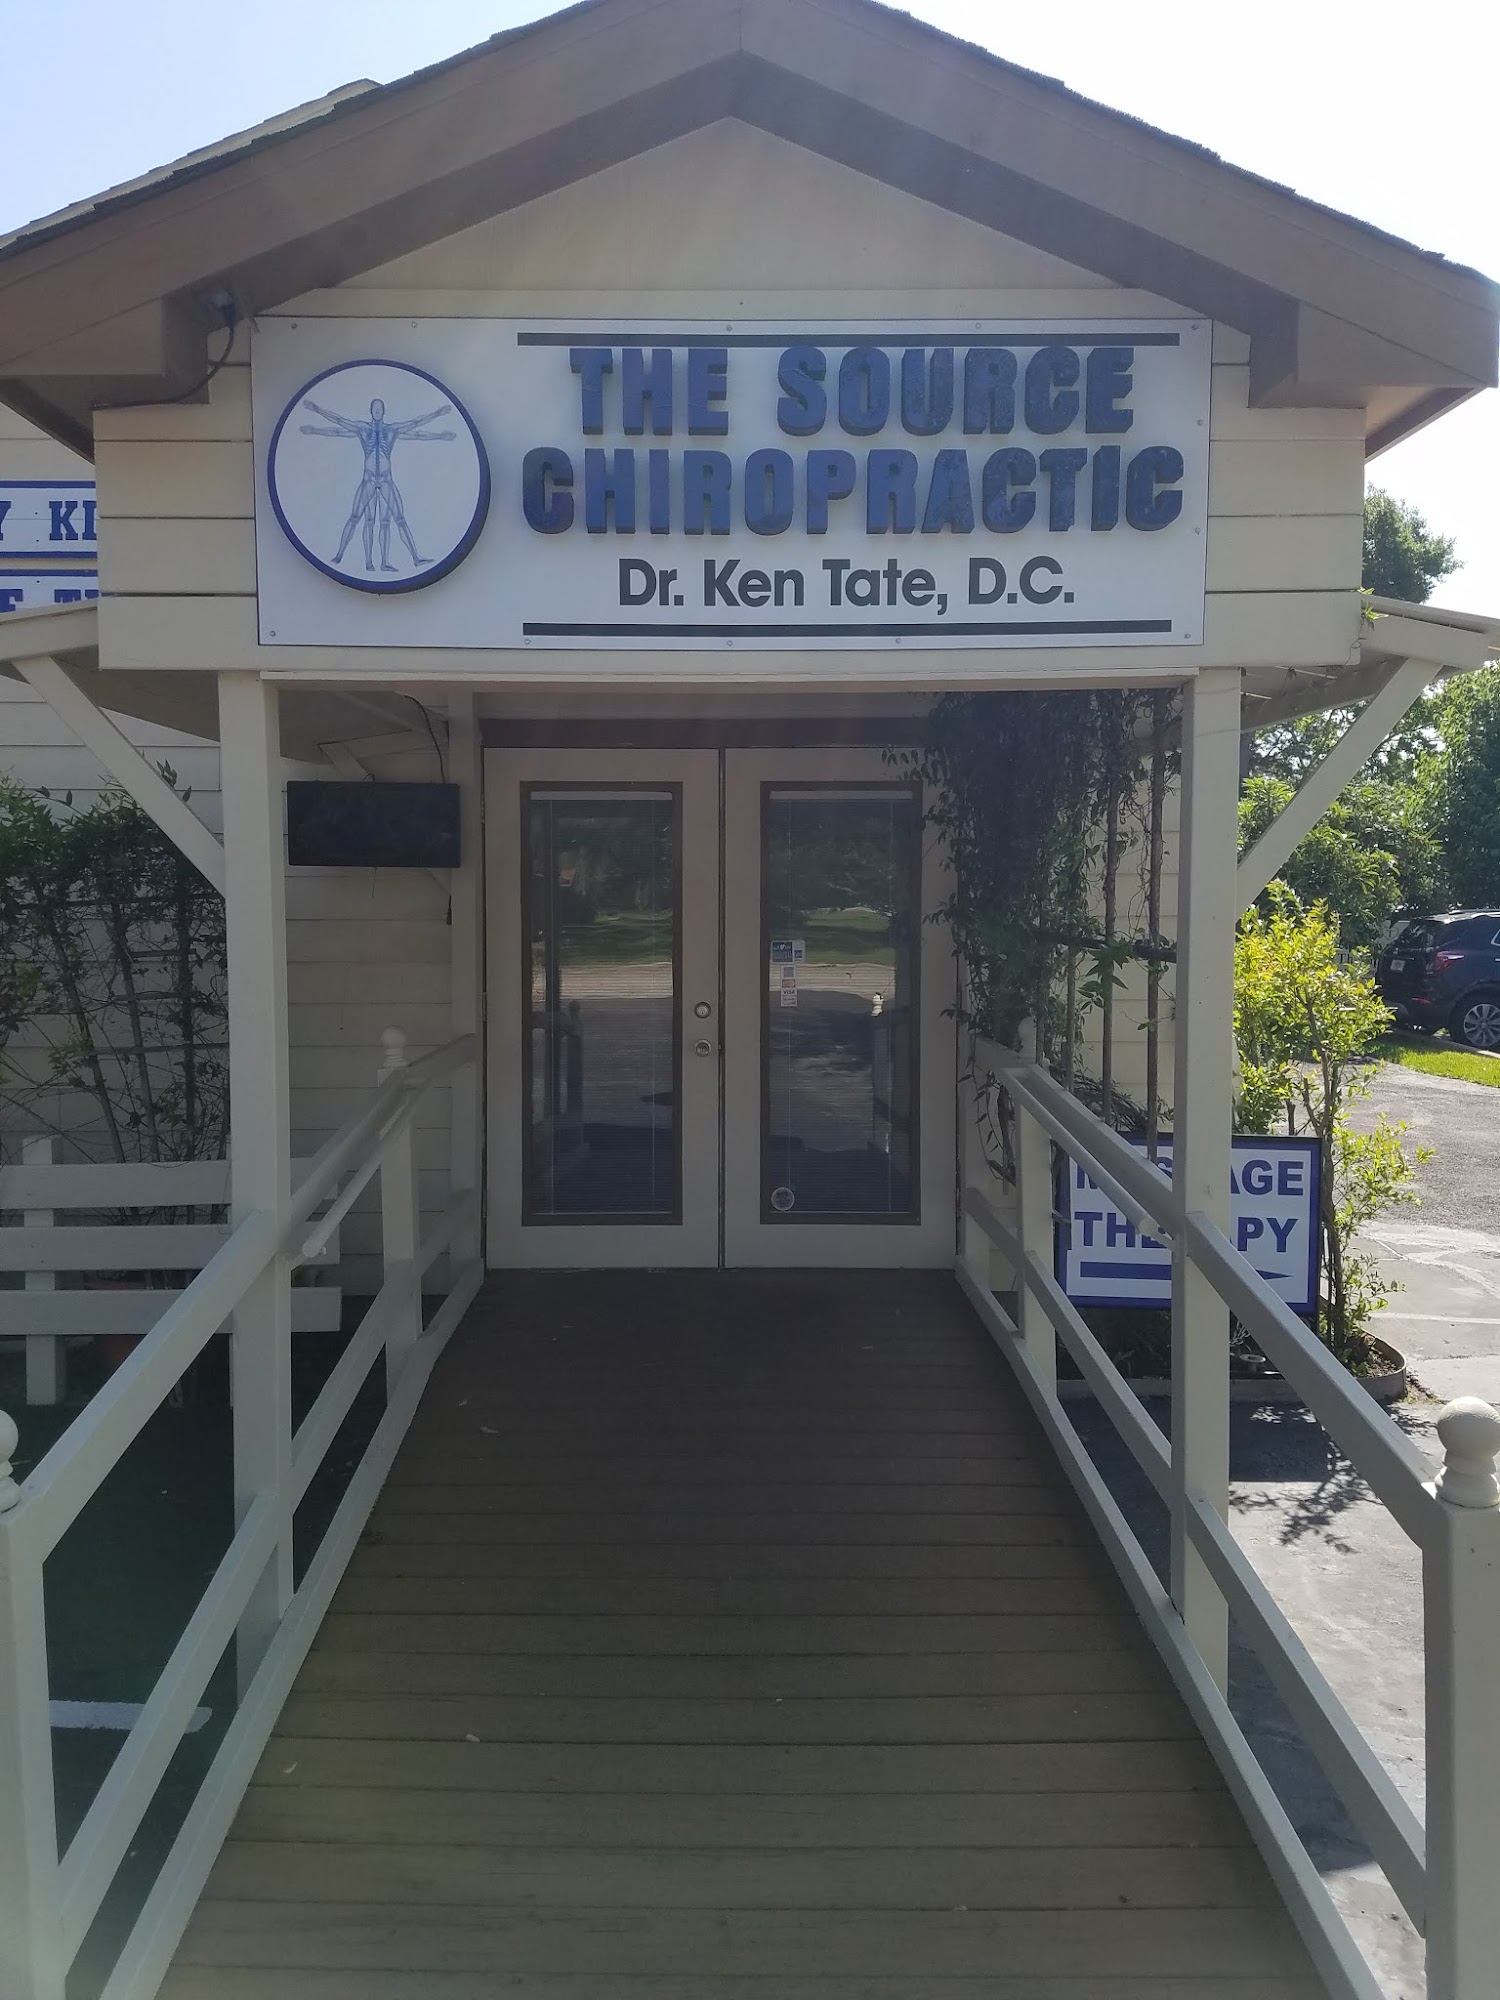 The Source Chiropractic